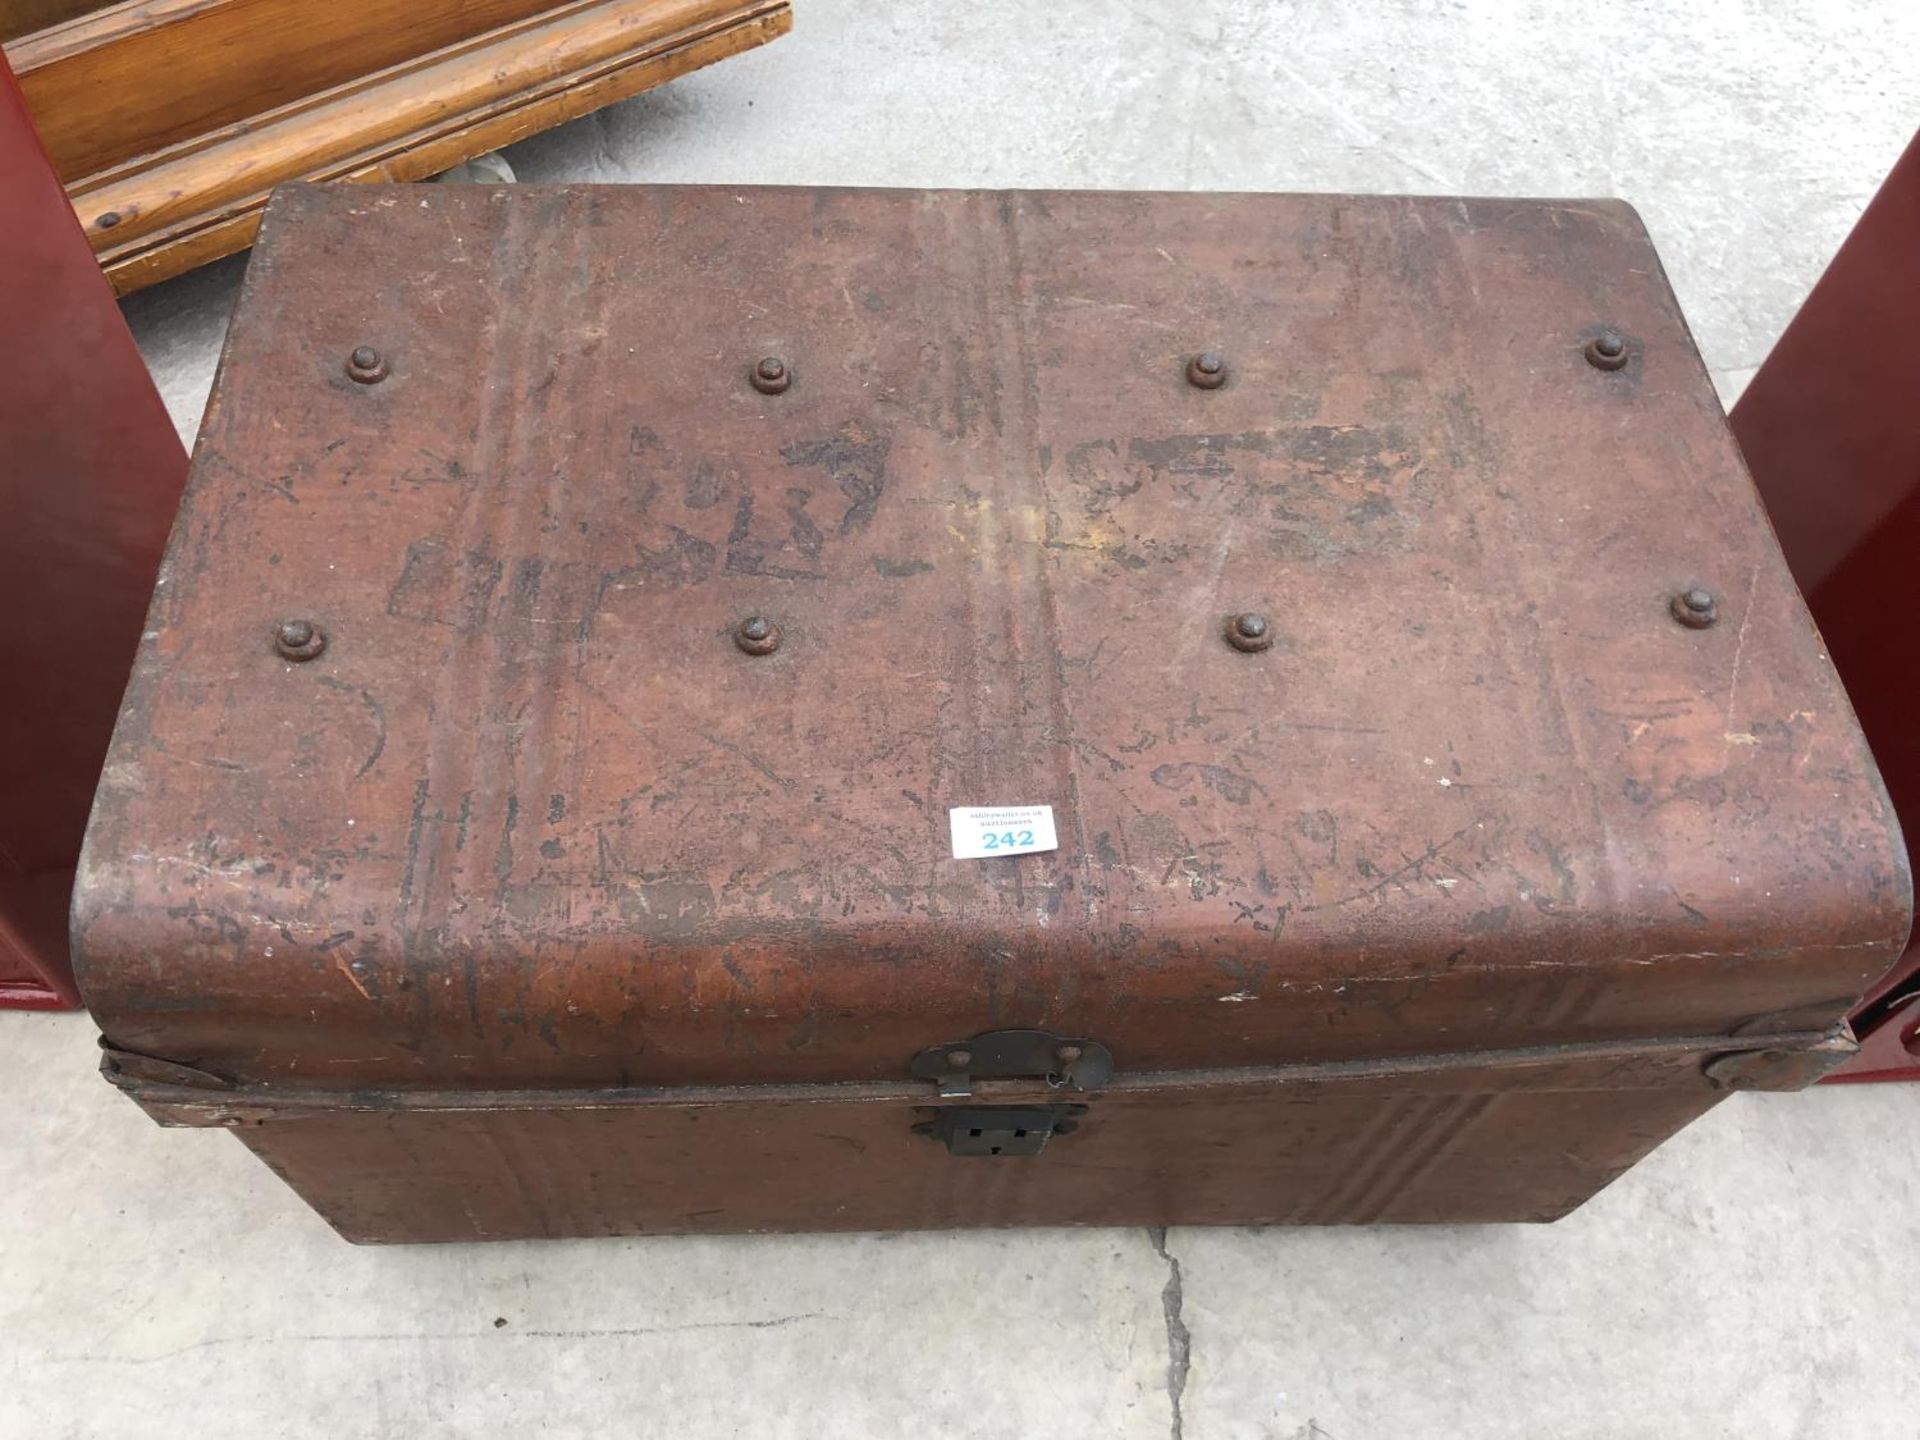 A VINTAGE METAL TRAVELLING TRUNK WITH BLUE INTERIOR